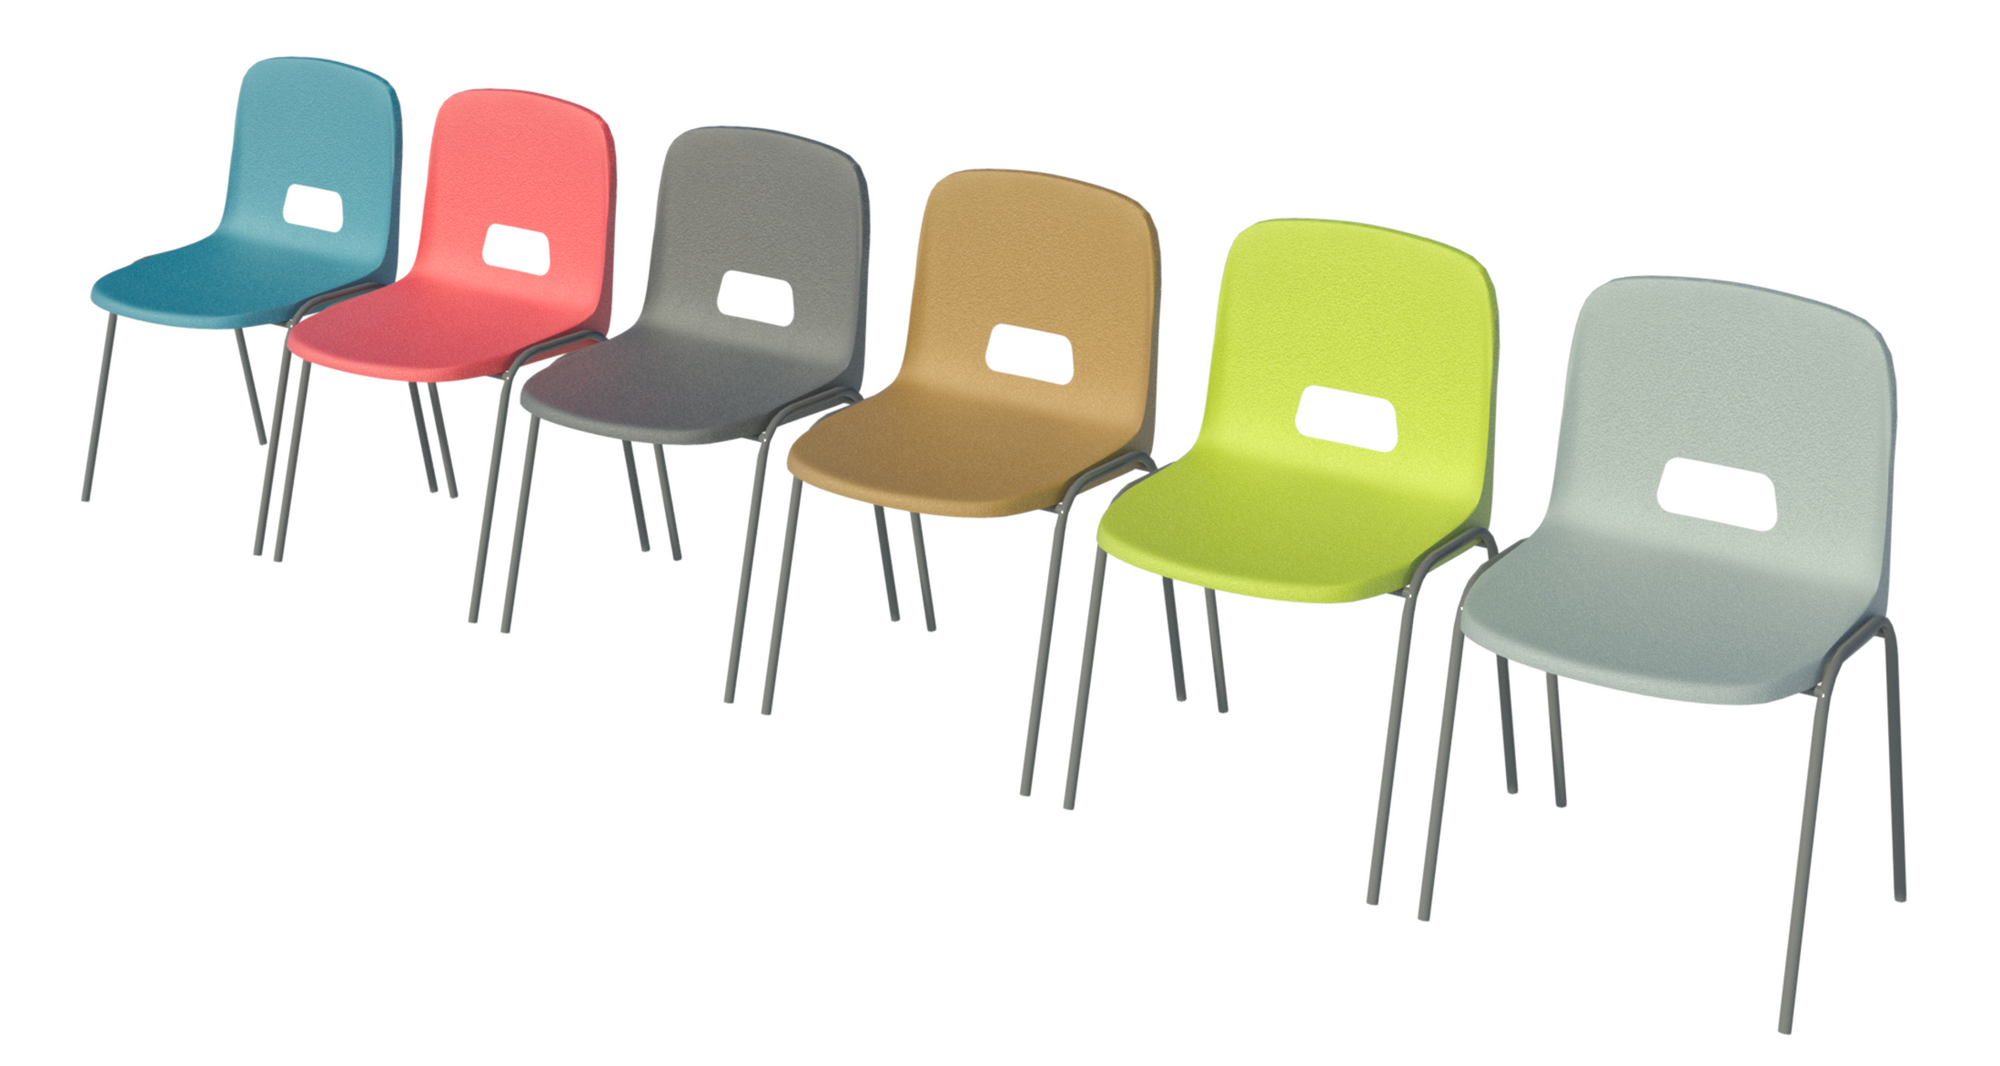 Revit family of plastic cafeteria chairs from Direct2U.